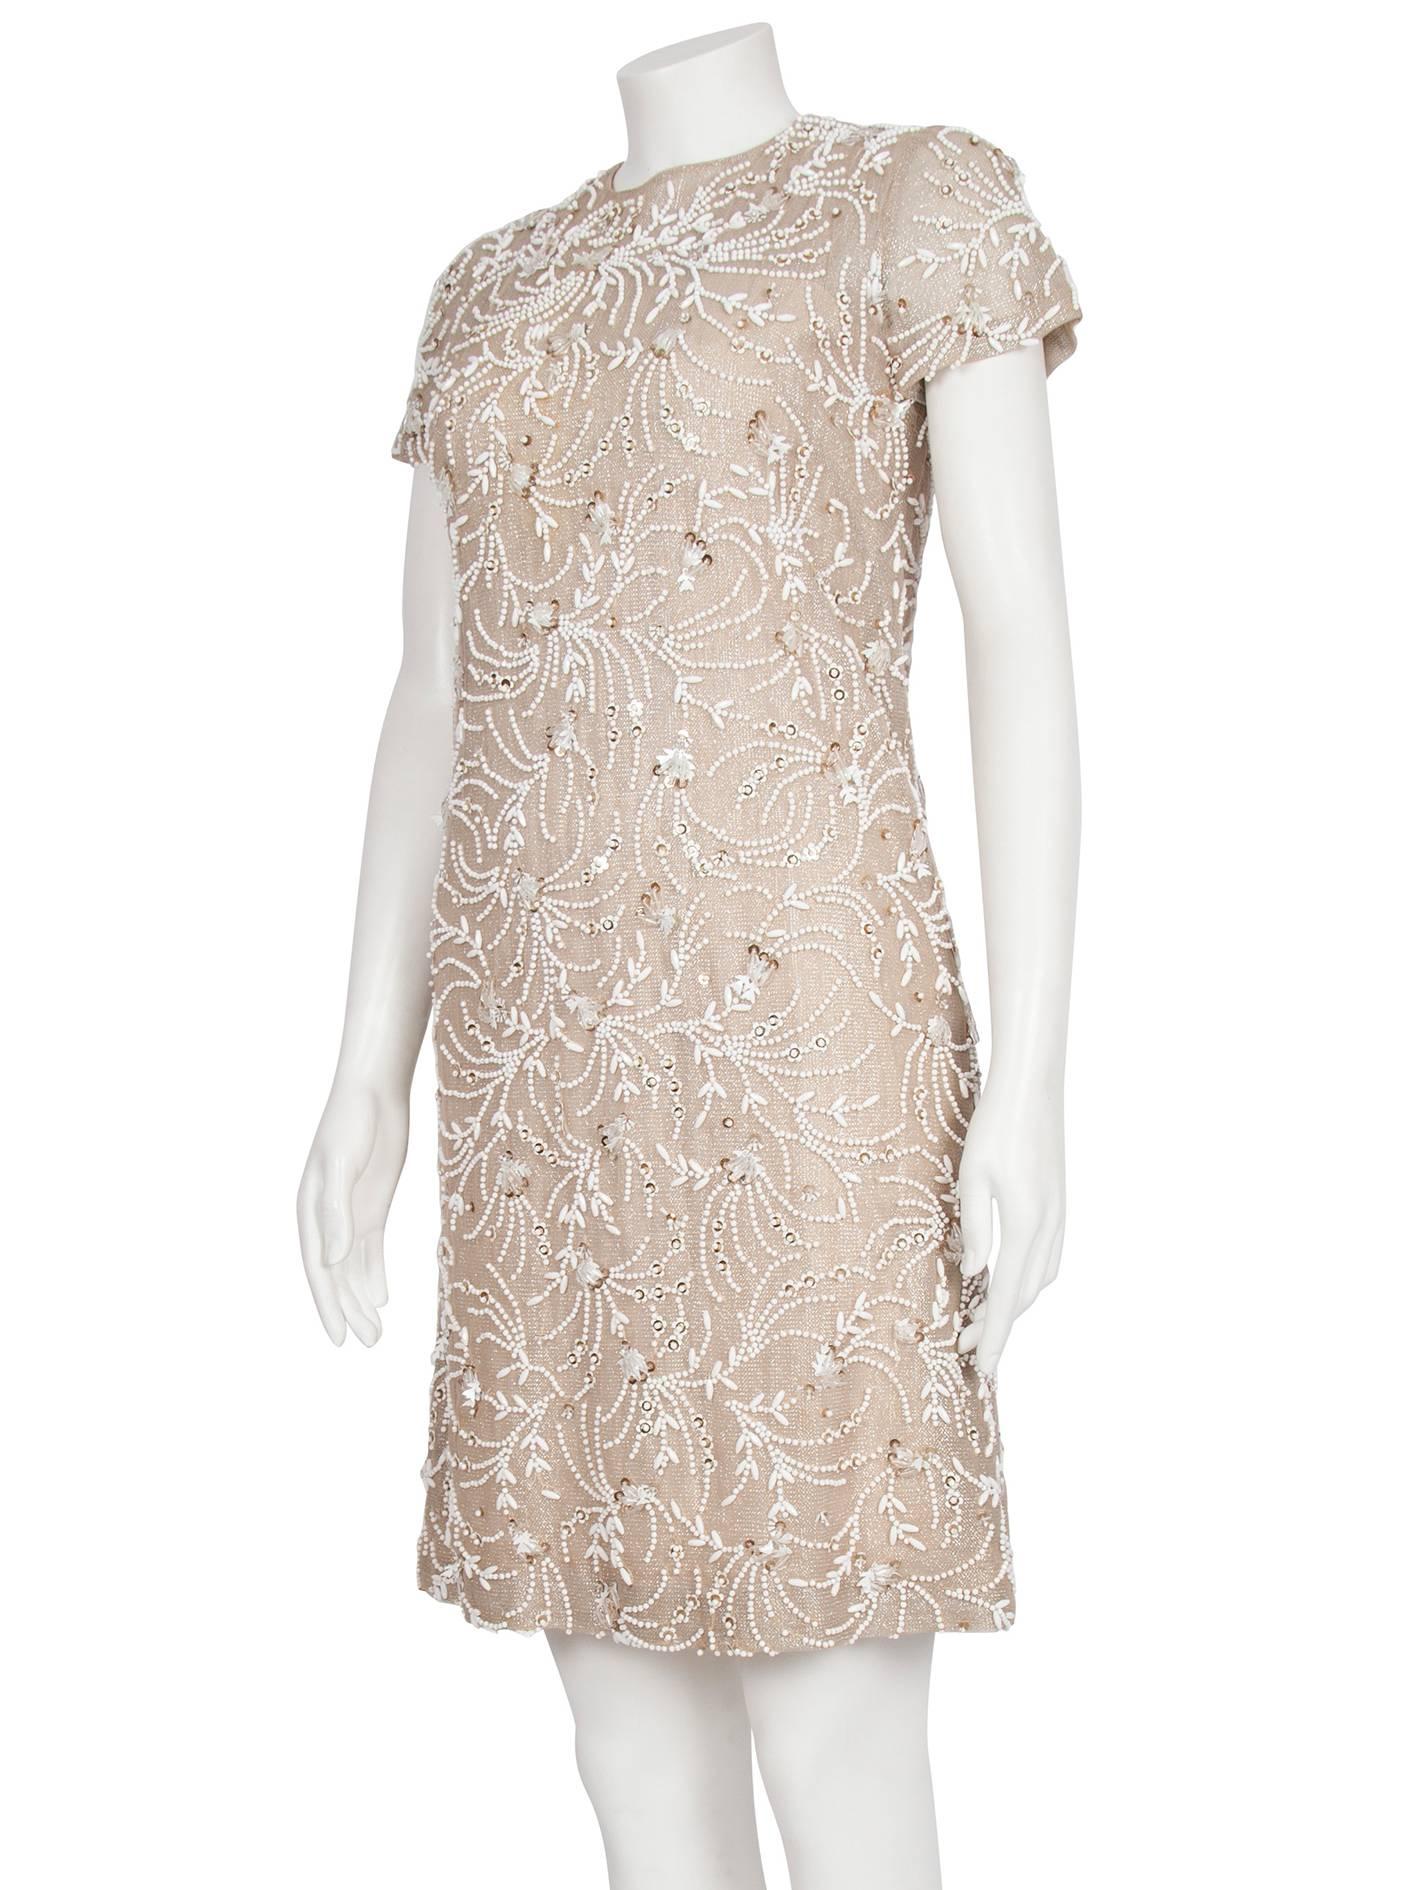 1960s Malcolm Starr Metallic and Ivory Beaded Shift Dress For Sale 3